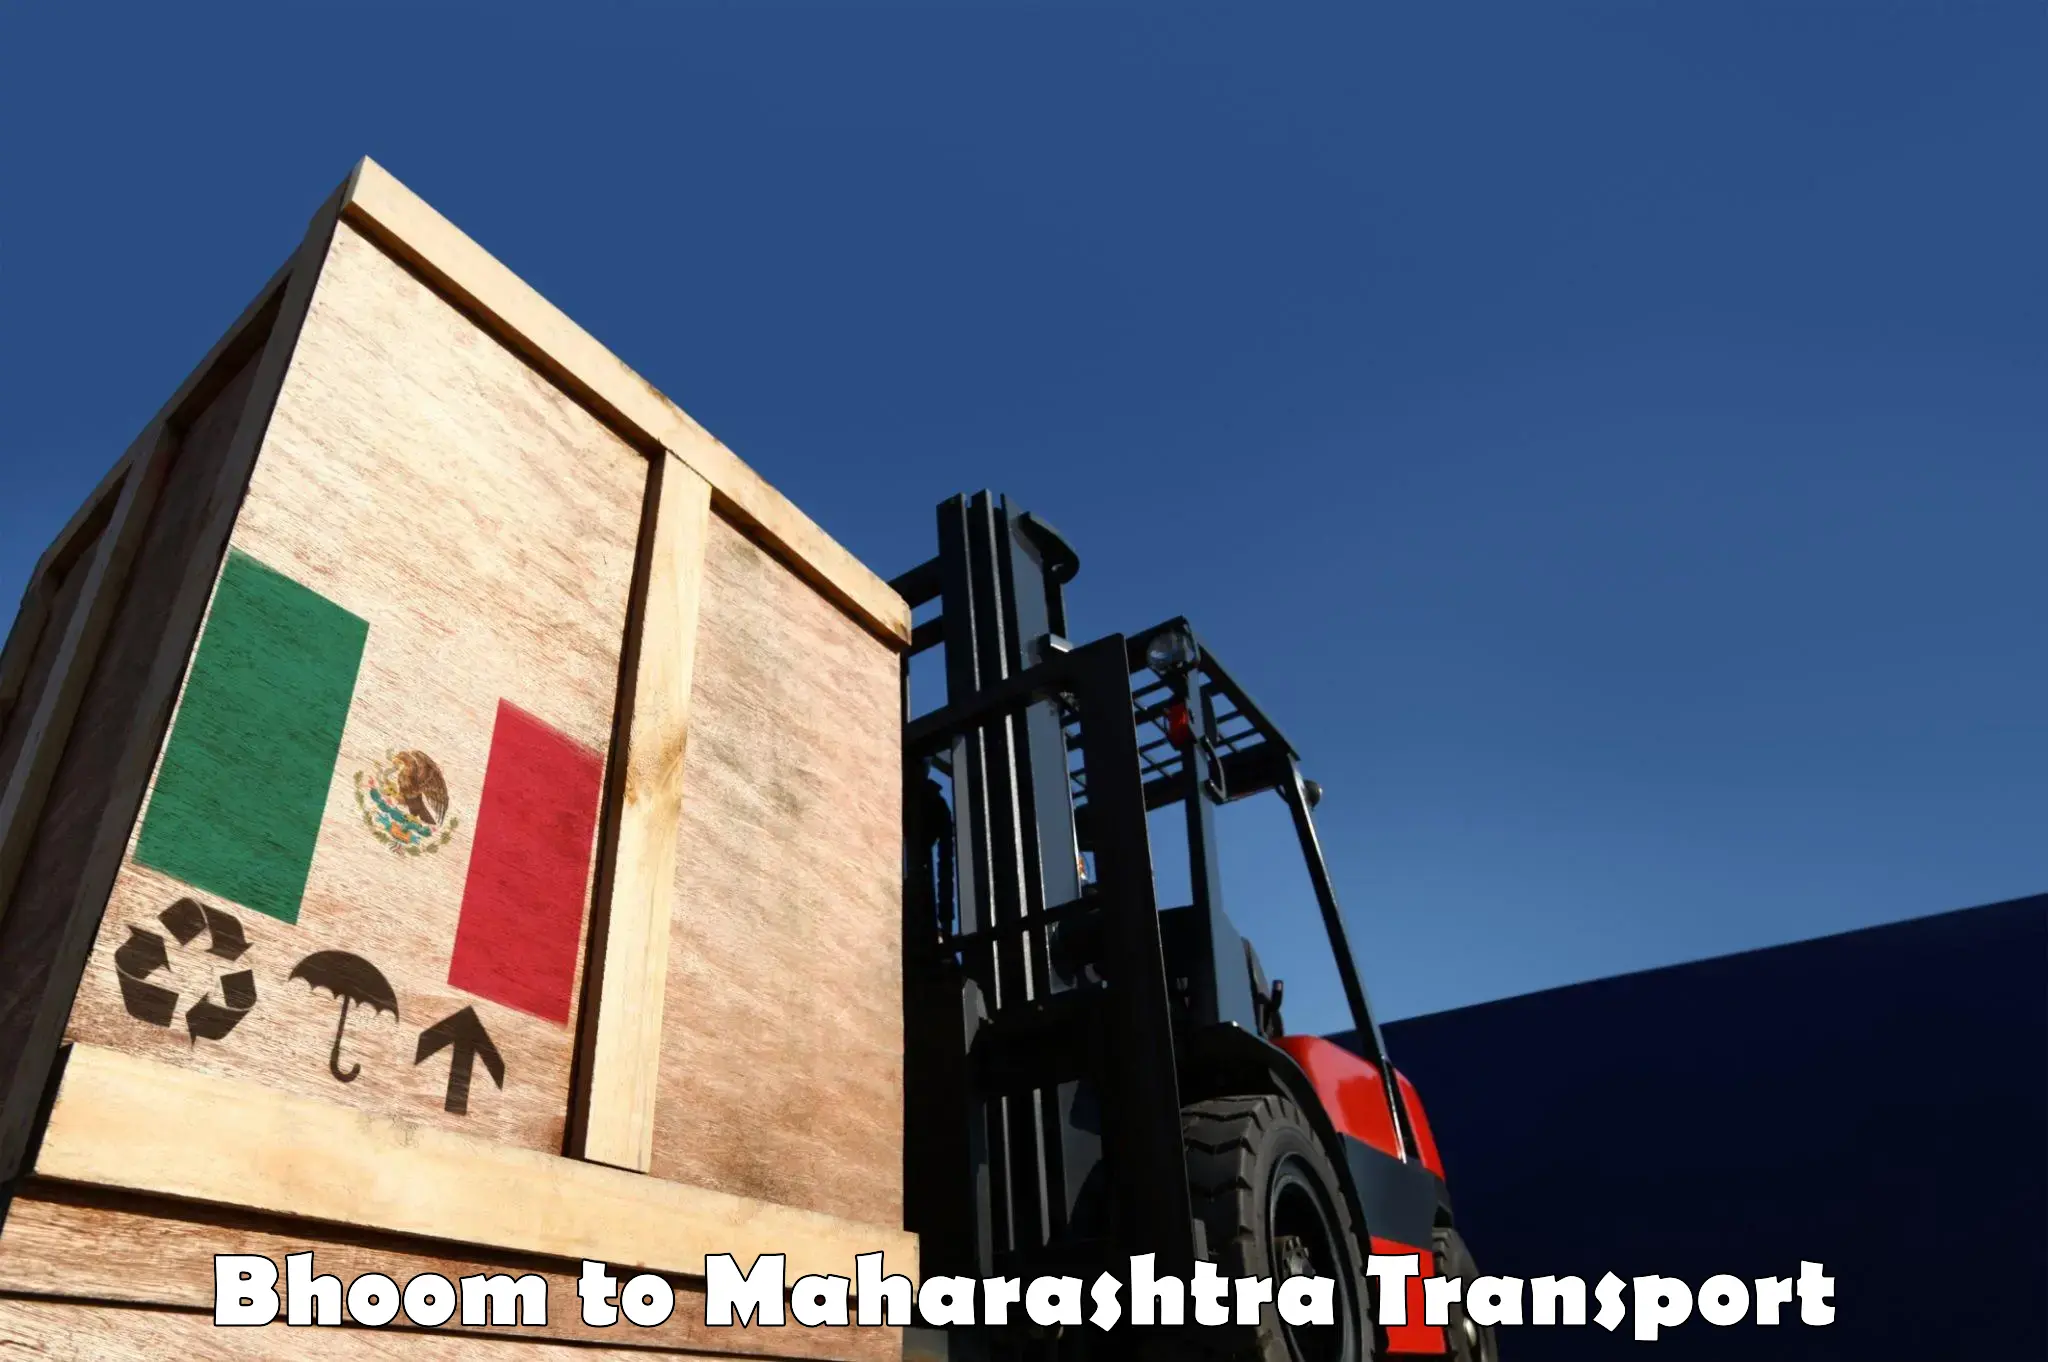 Land transport services in Bhoom to Nagothane